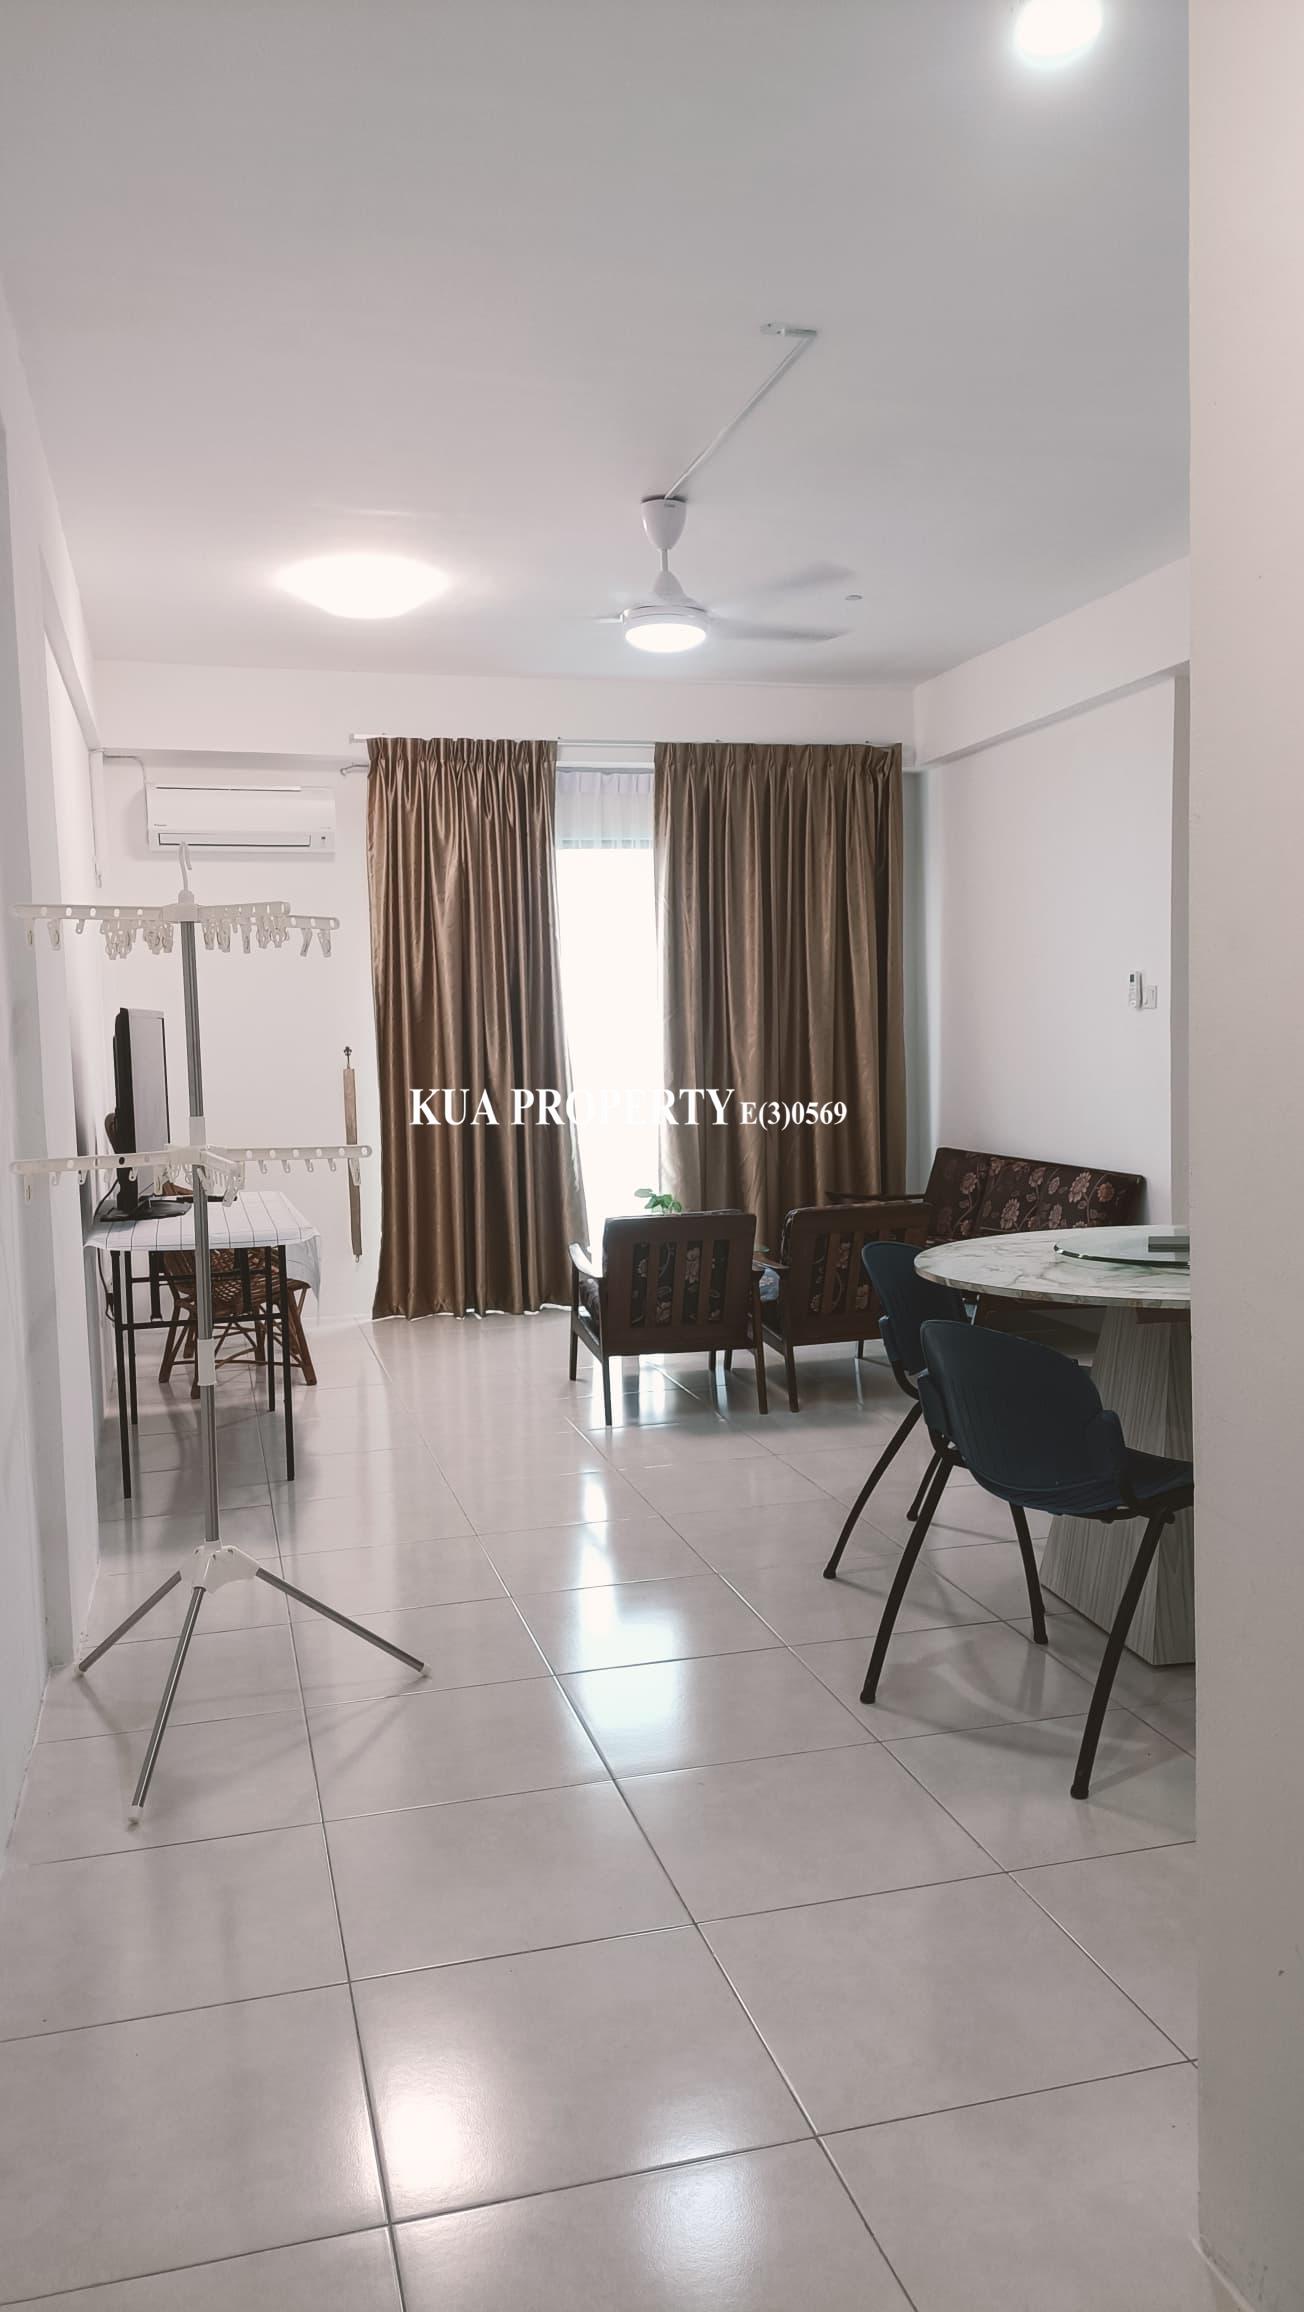 The 1878 Apartment For Rent! Located at Tabuan Jaya